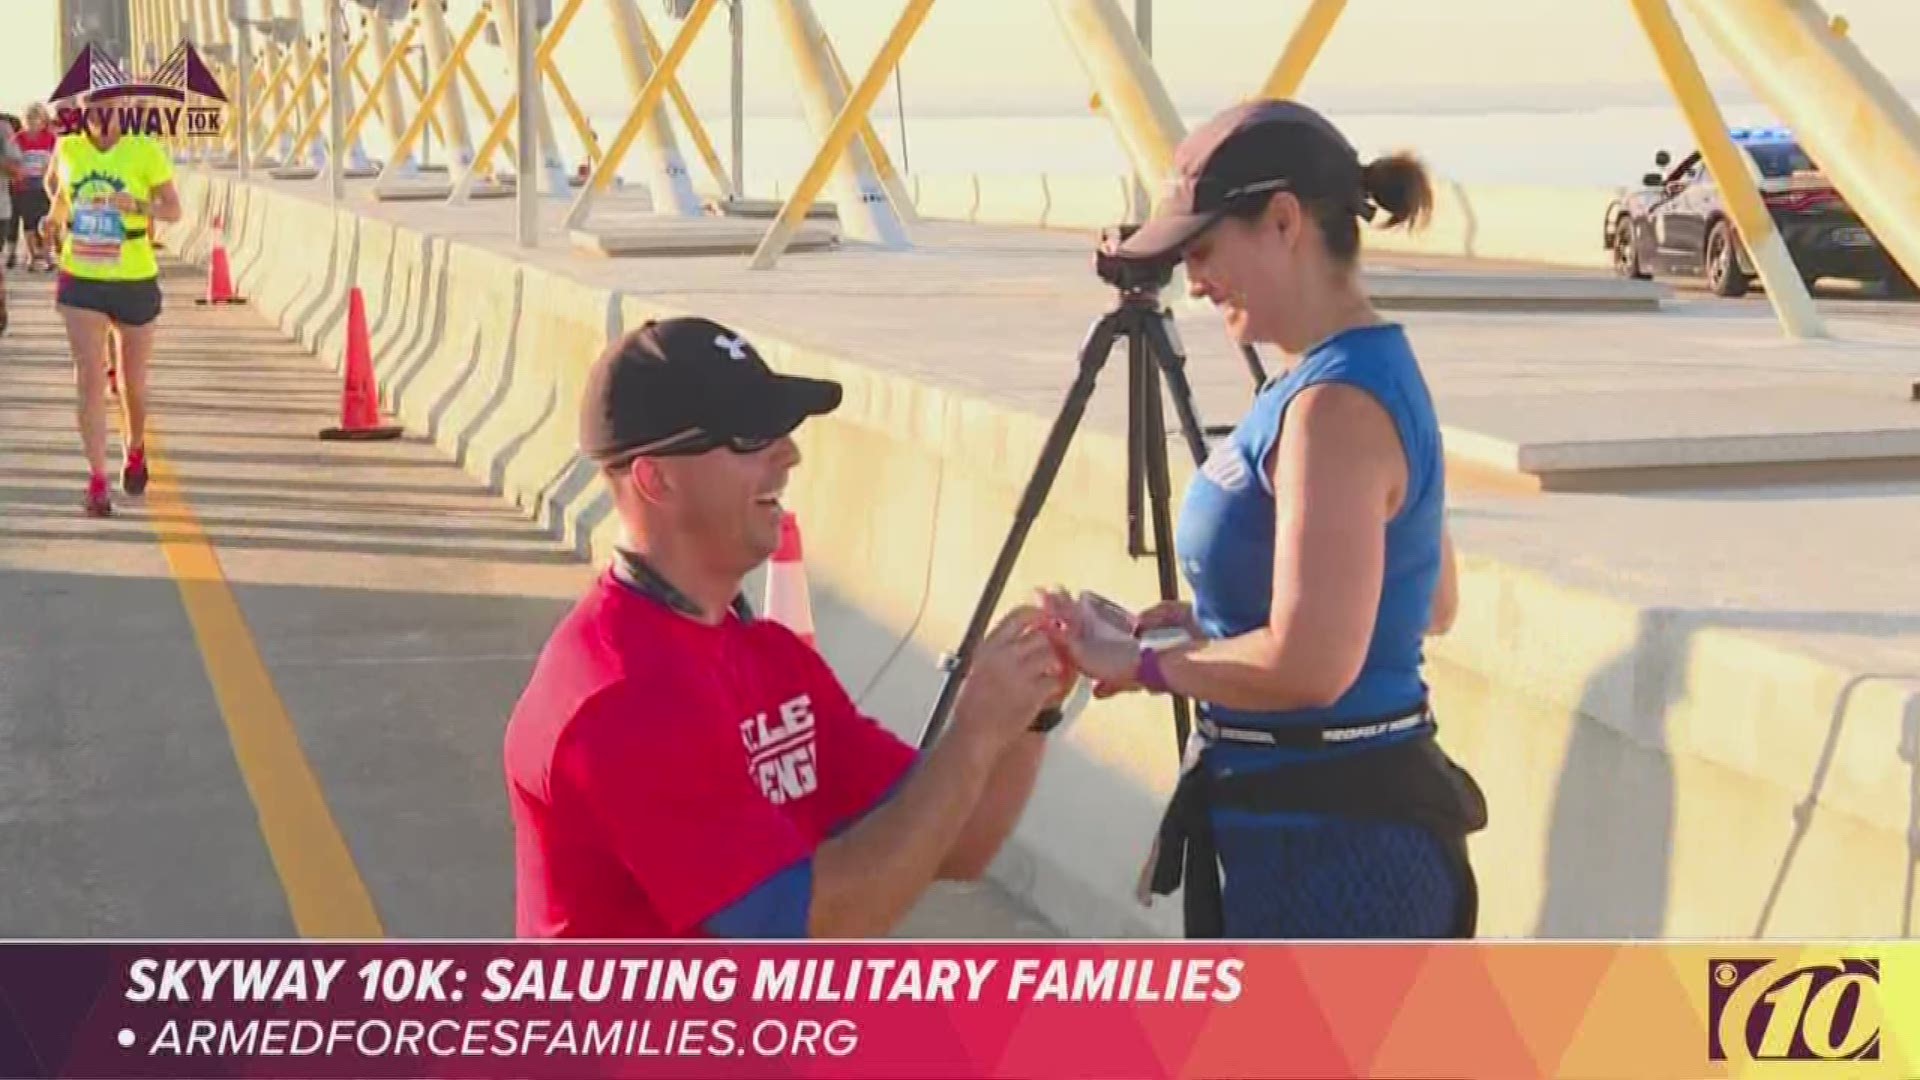 Surprise! Mark Adams proposed to his girlfriend on top of the Sunshine Skyway Bridge during the Skyway 10K.